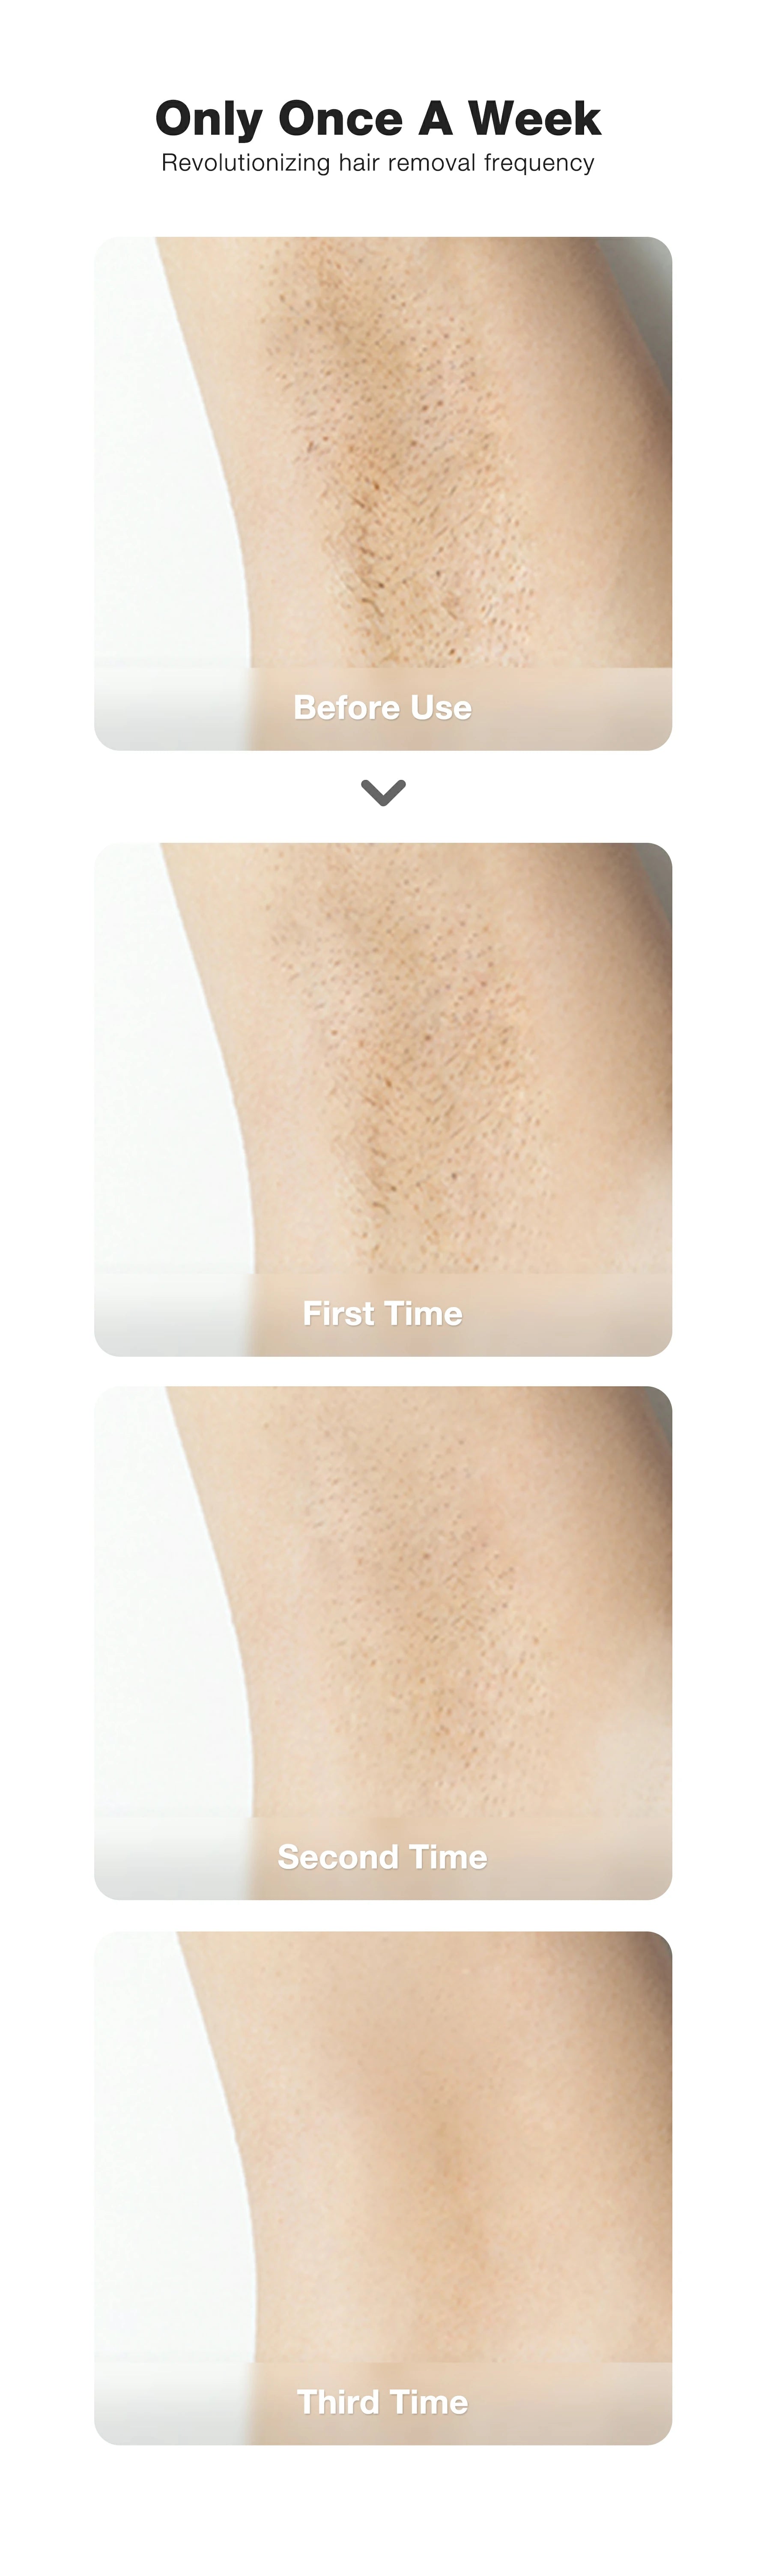 Progressive results of using JOVS X™ Hair Removal Device, showing hair density from before use, after the first, second, and third sessions.